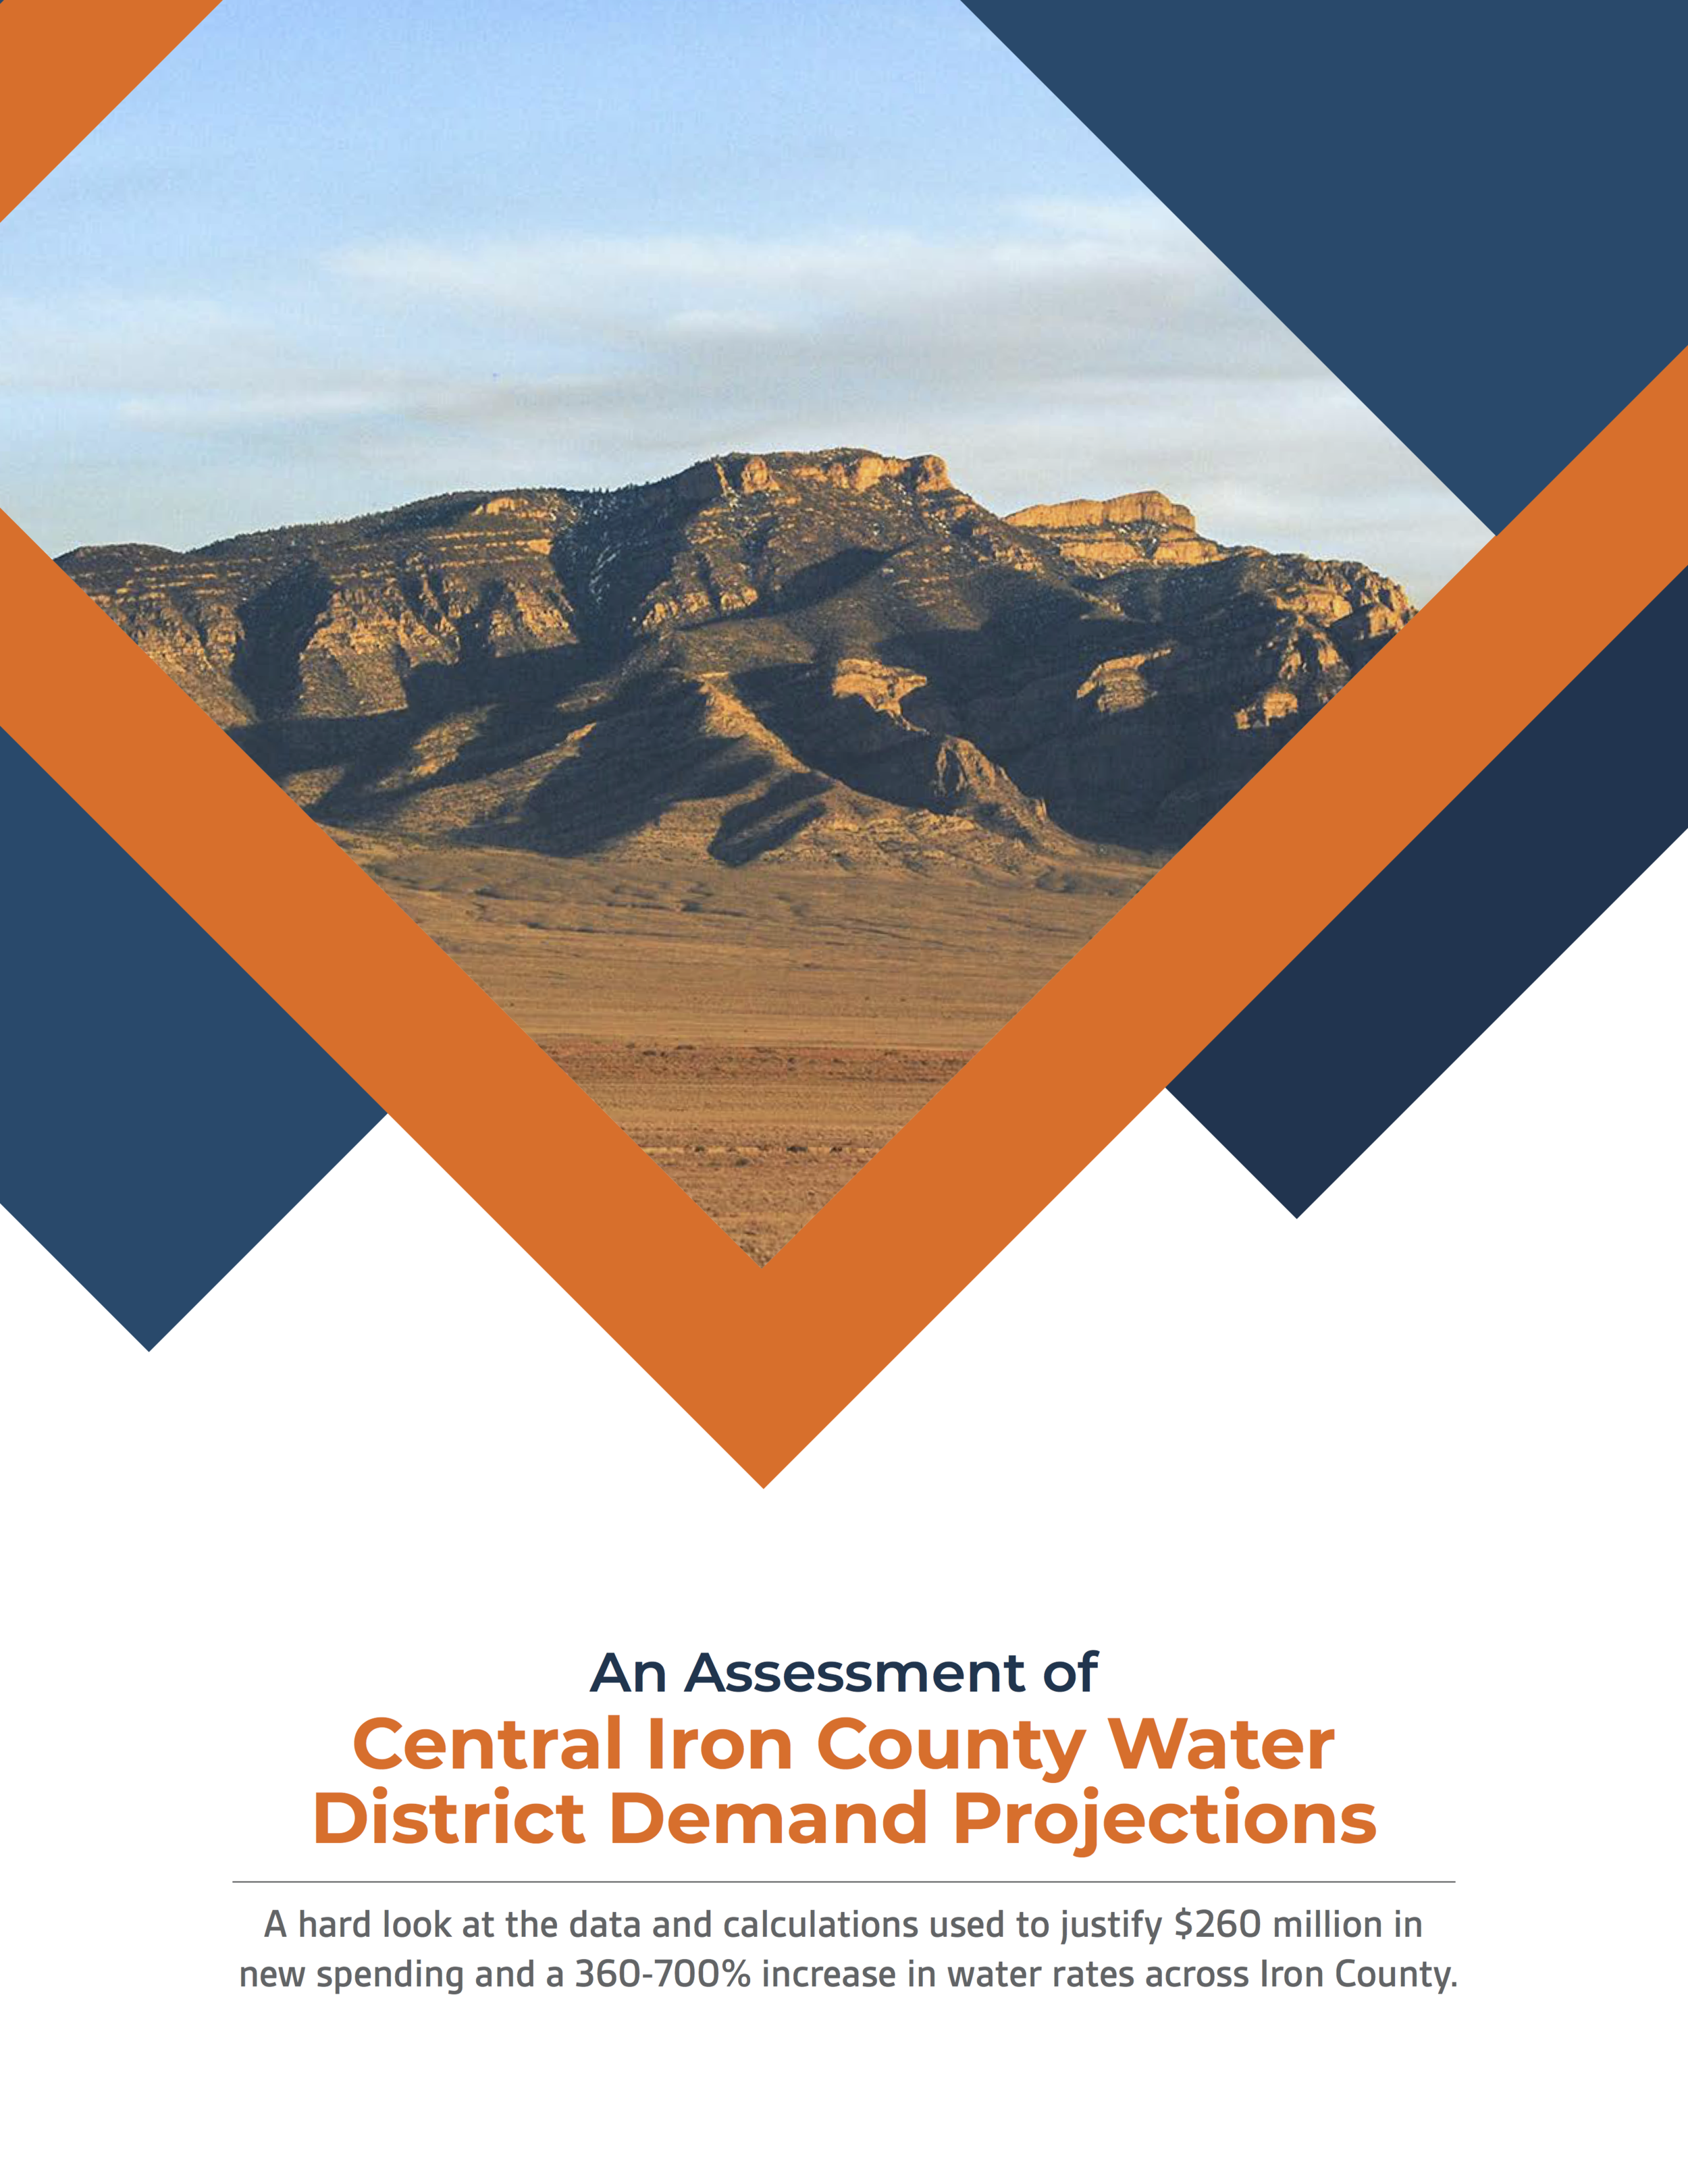 An Assessment of Central Iron County Water District Demand Projections